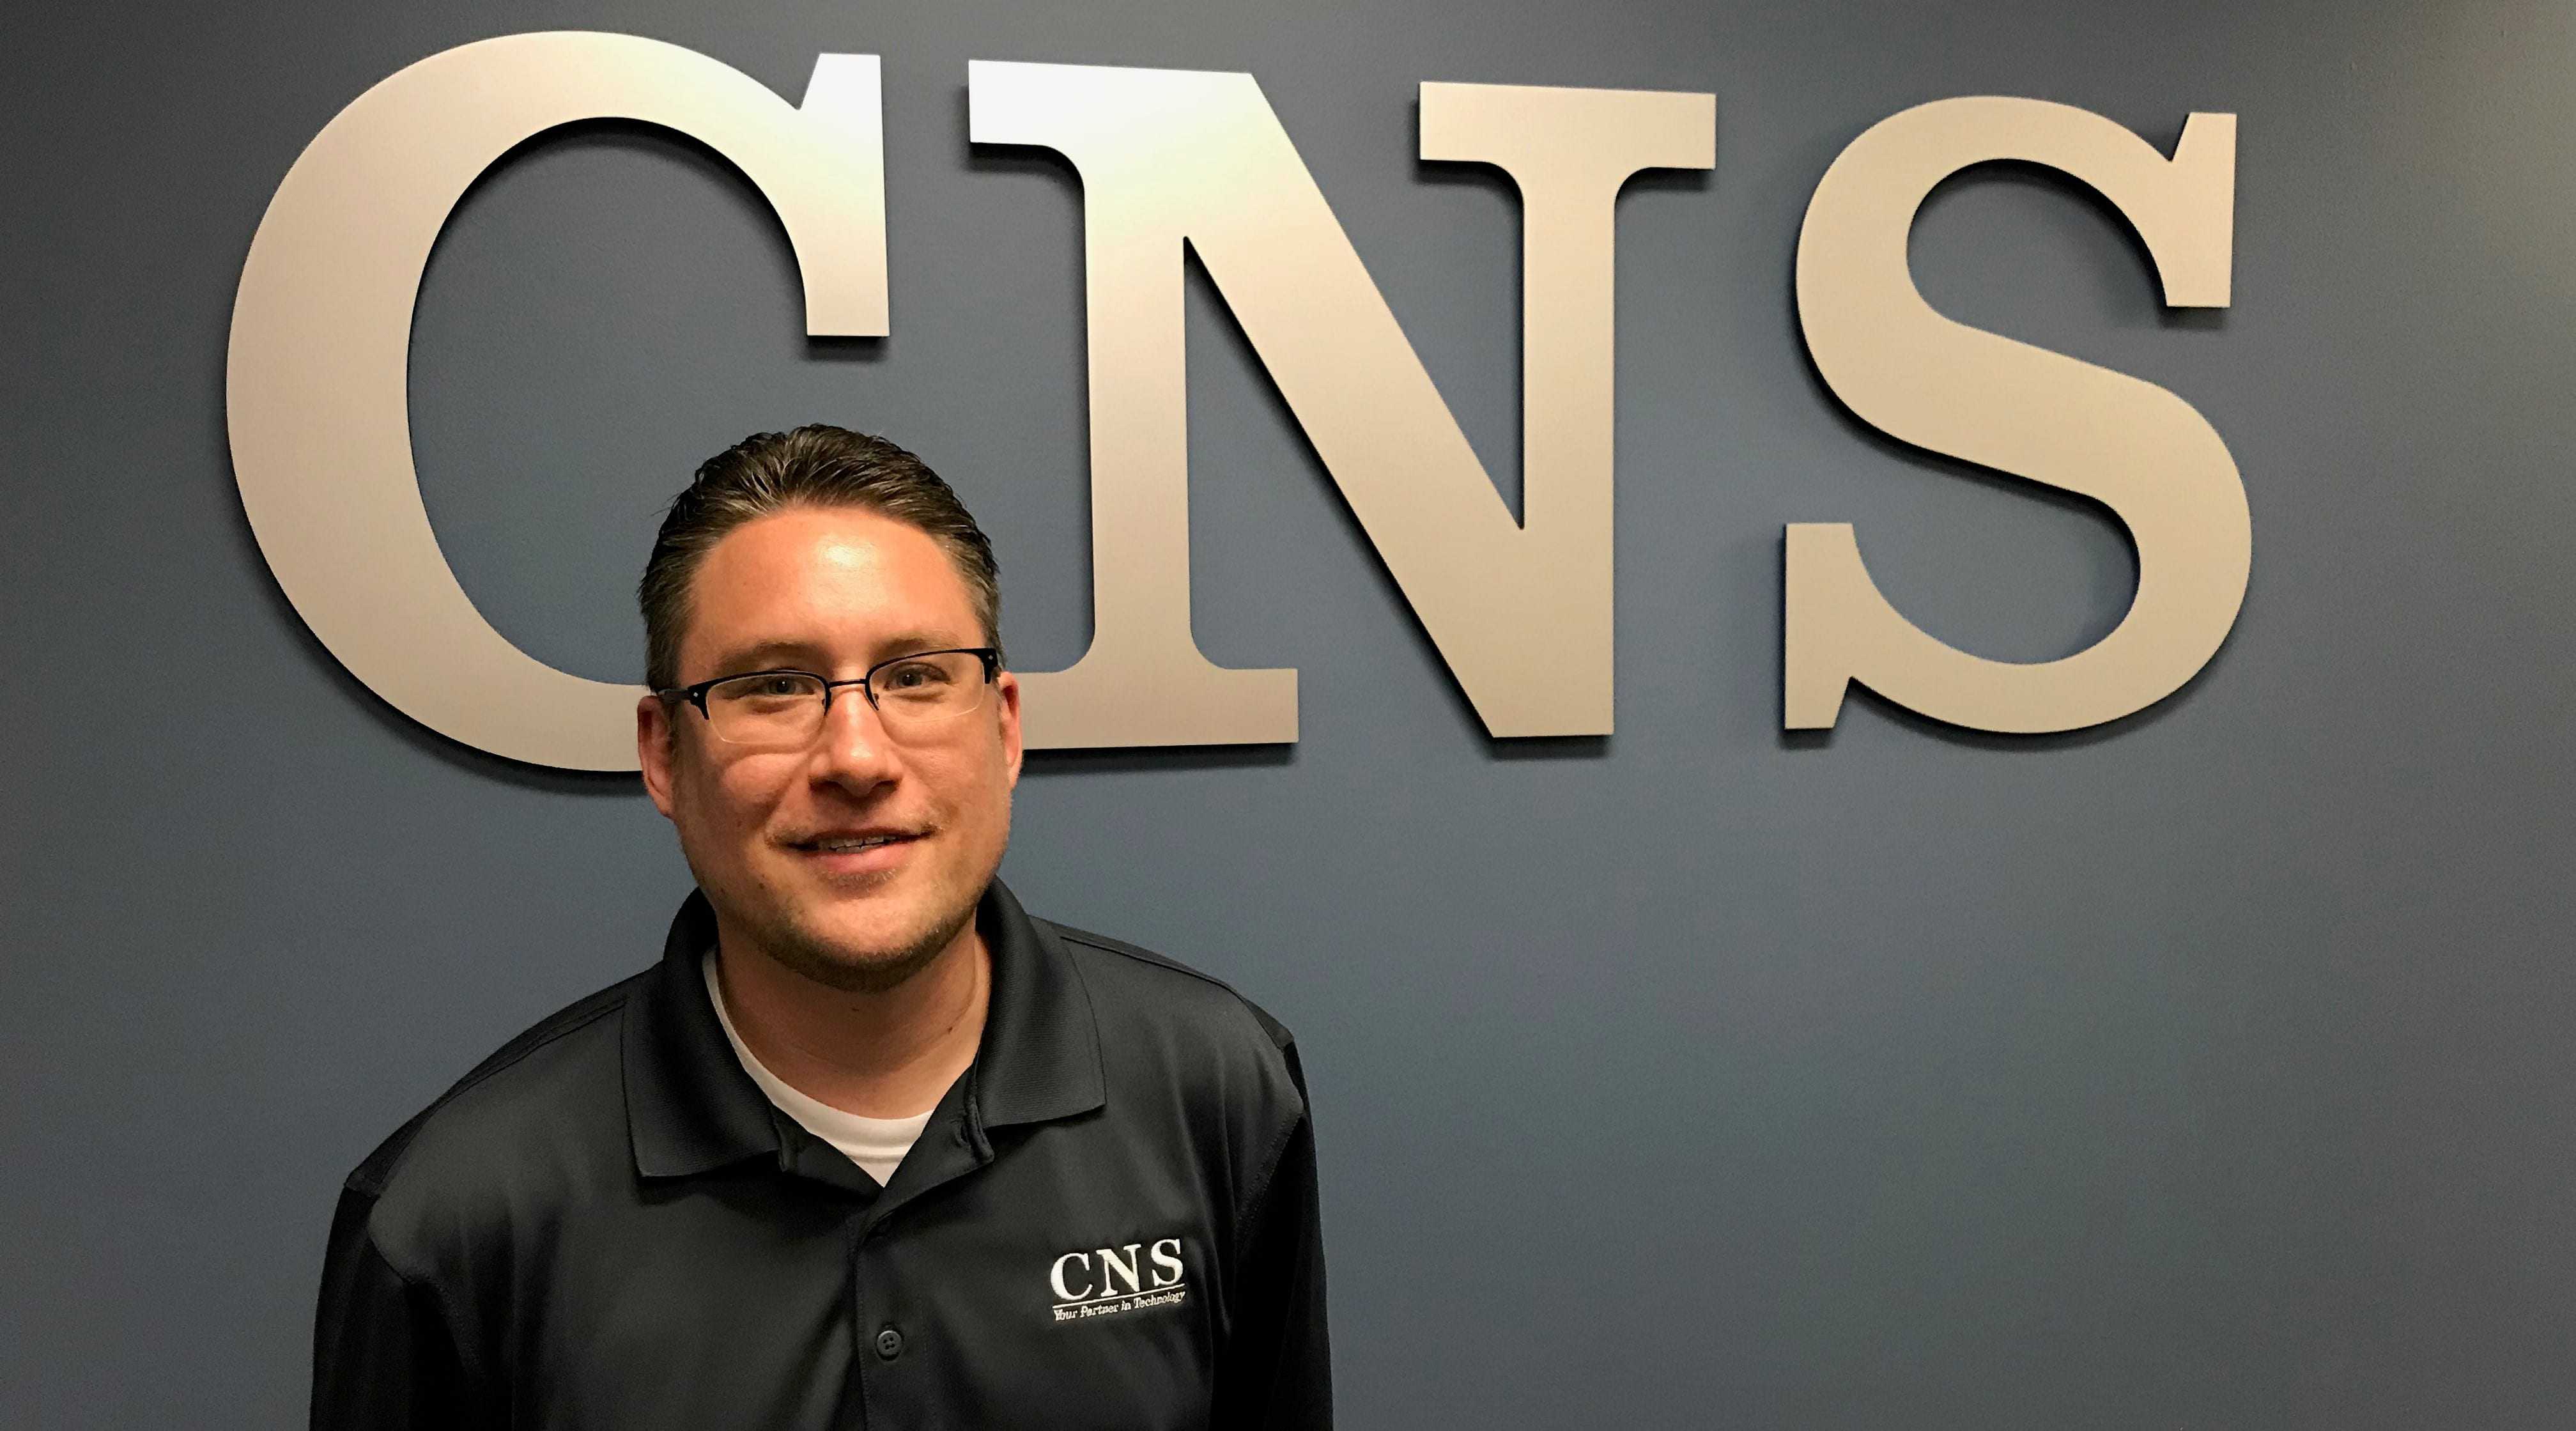 New CNS Director of IT Operations